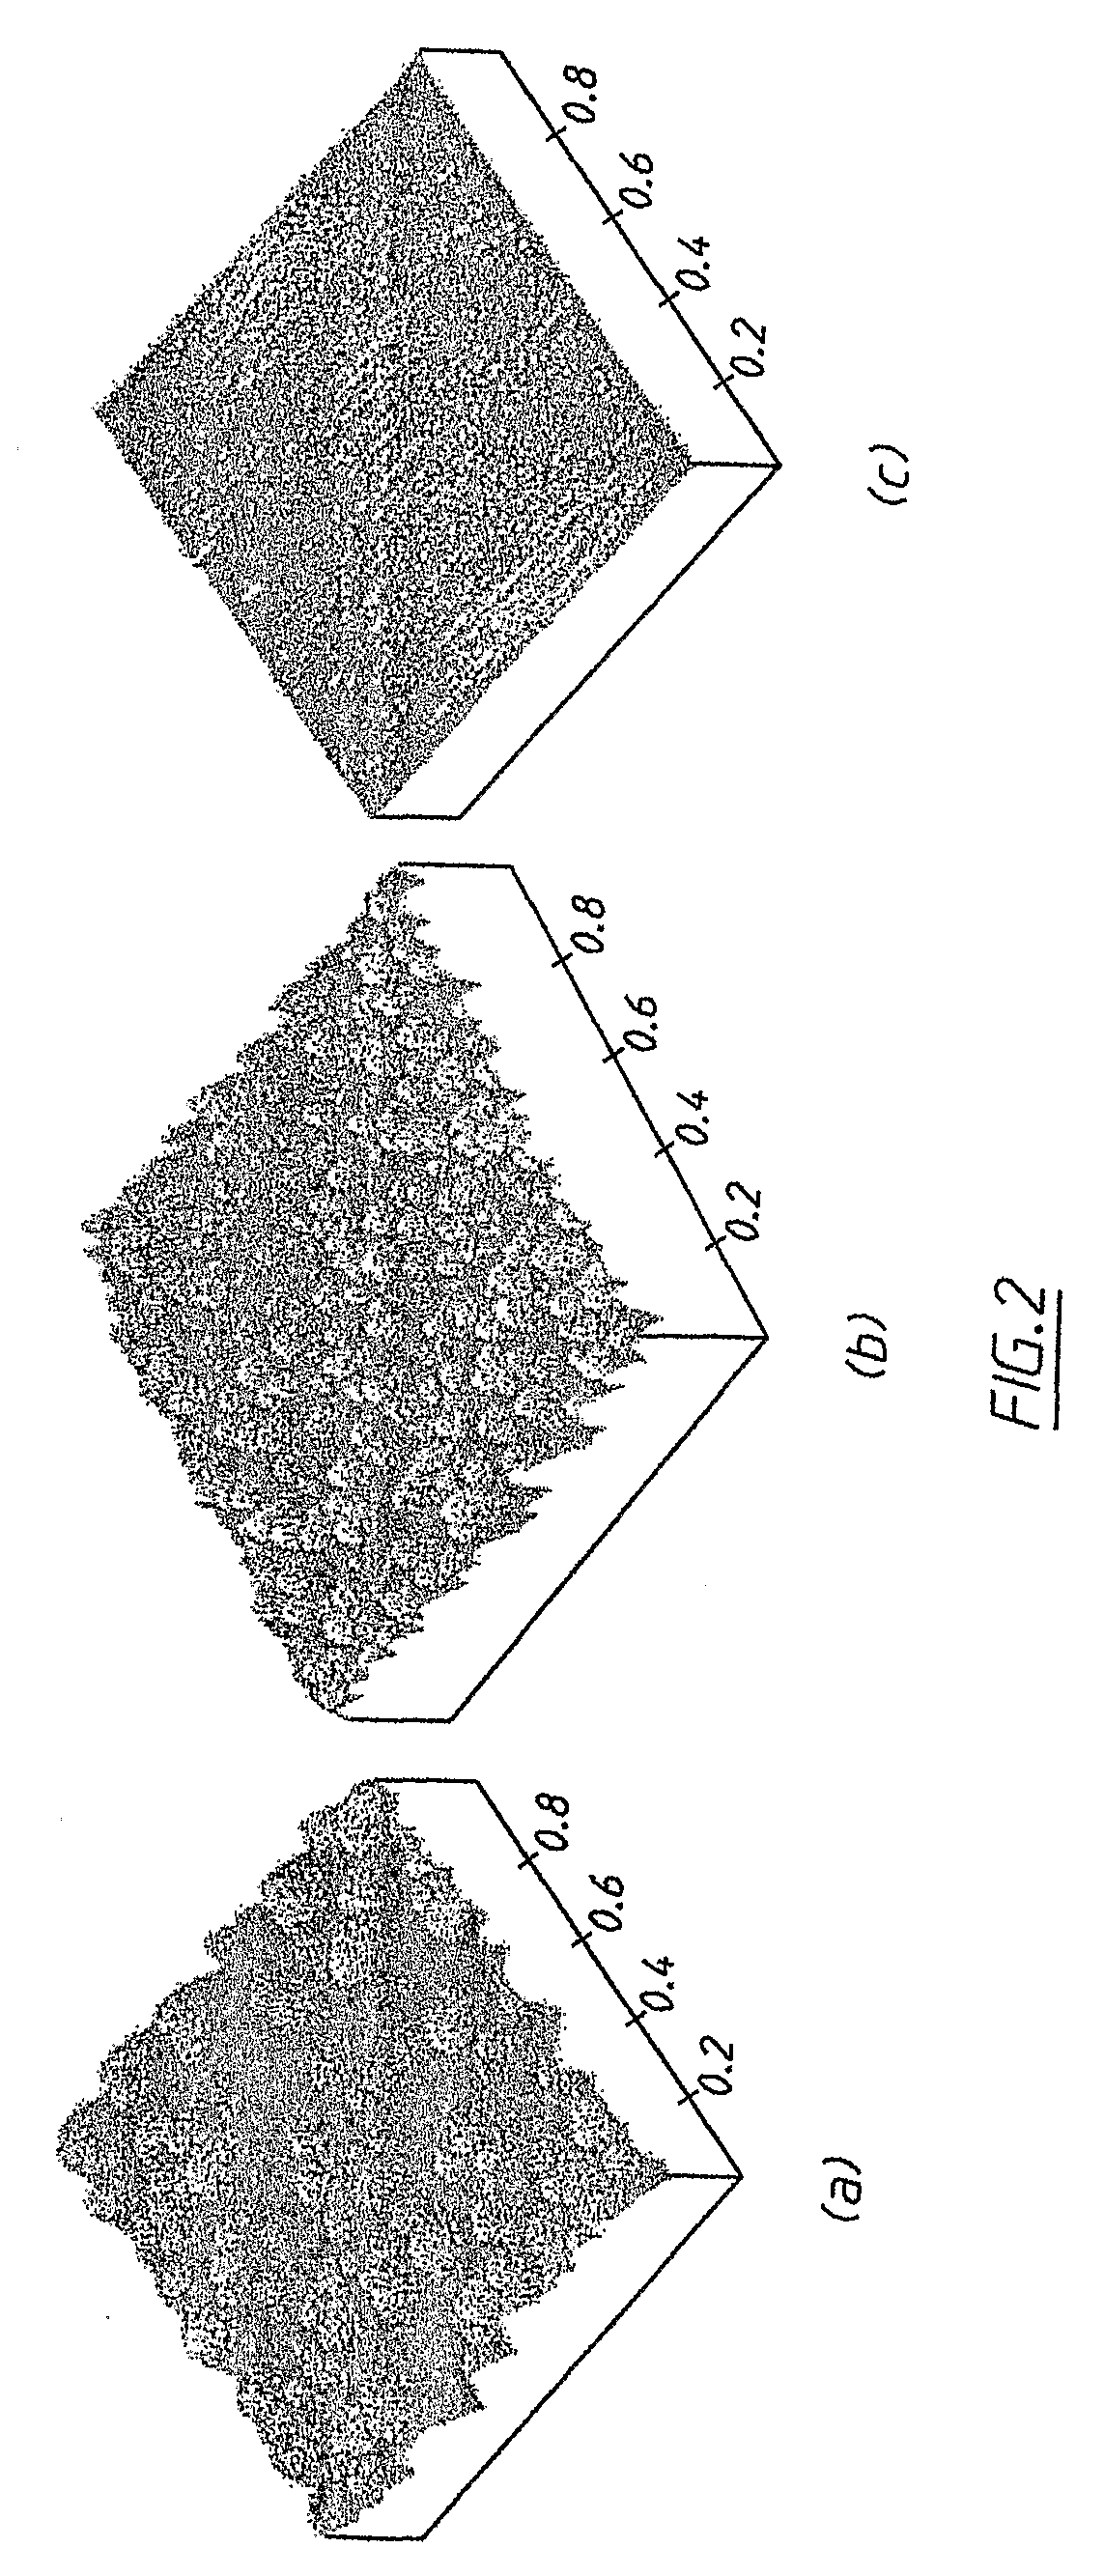 Method and Apparatus for Growing a Group (III) Metal Nitride Film and a Group (III) Metal Nitride Film